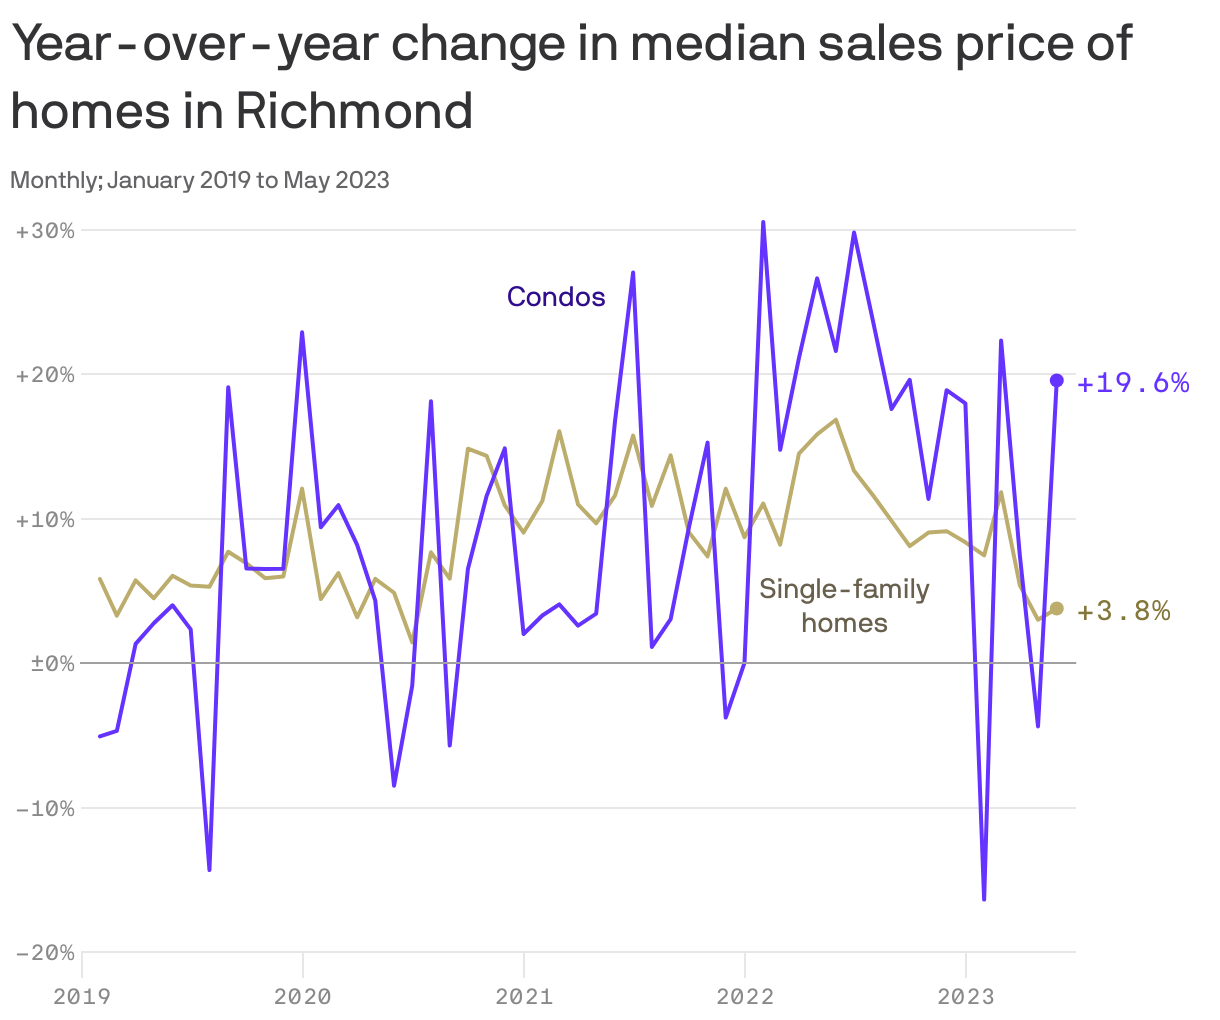 Year-over-year change in median sales price of homes in Richmond